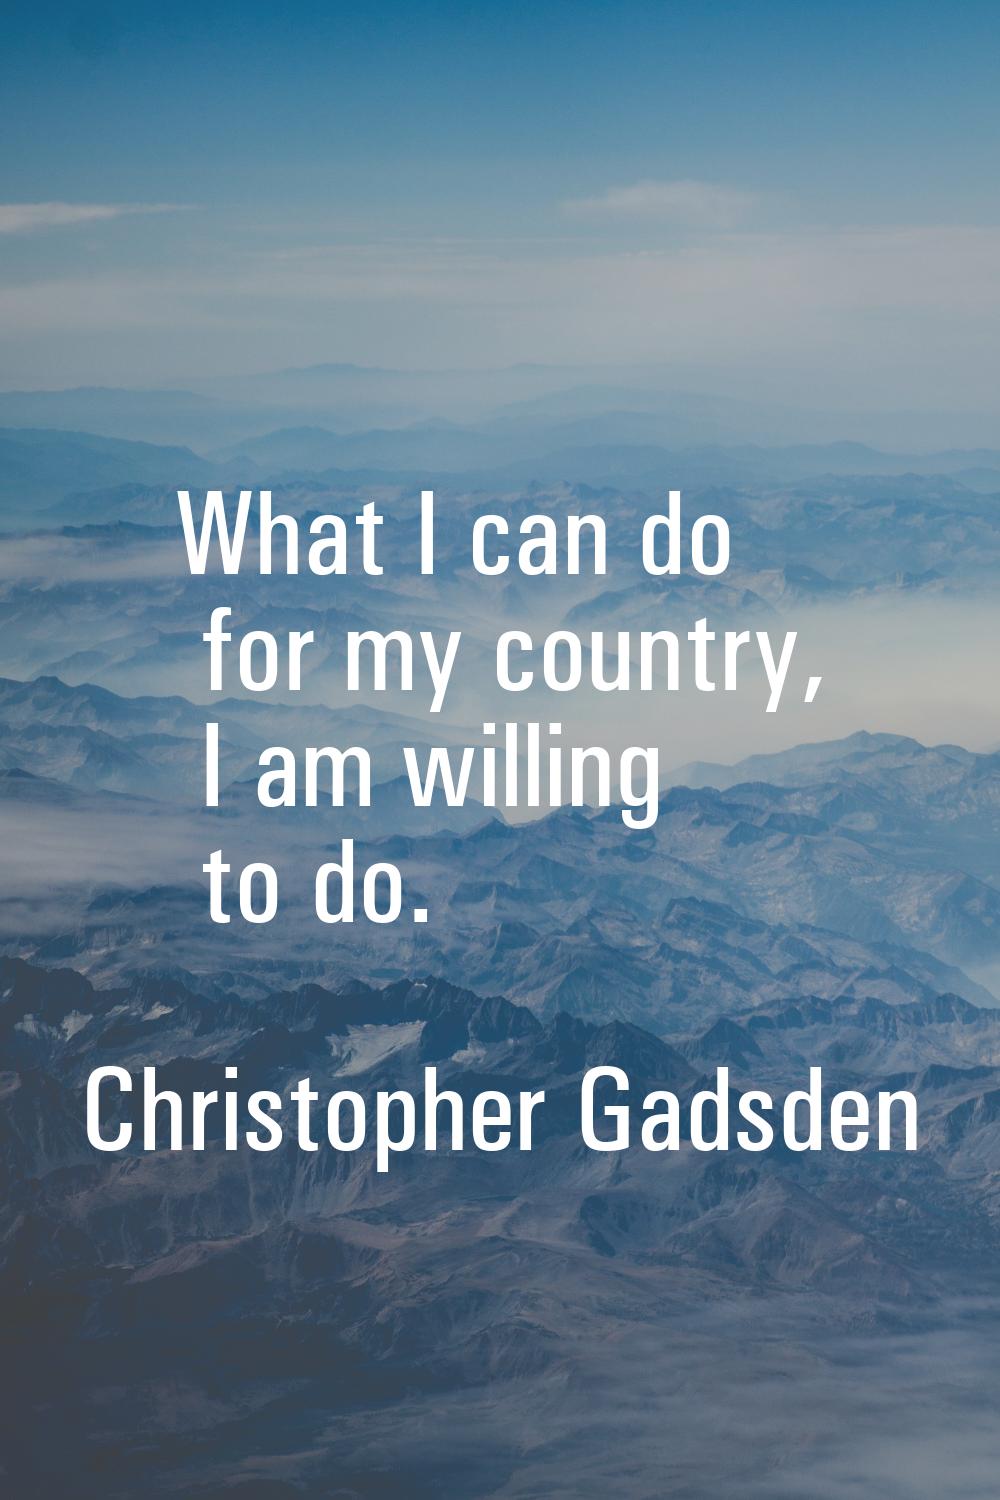 What I can do for my country, I am willing to do.